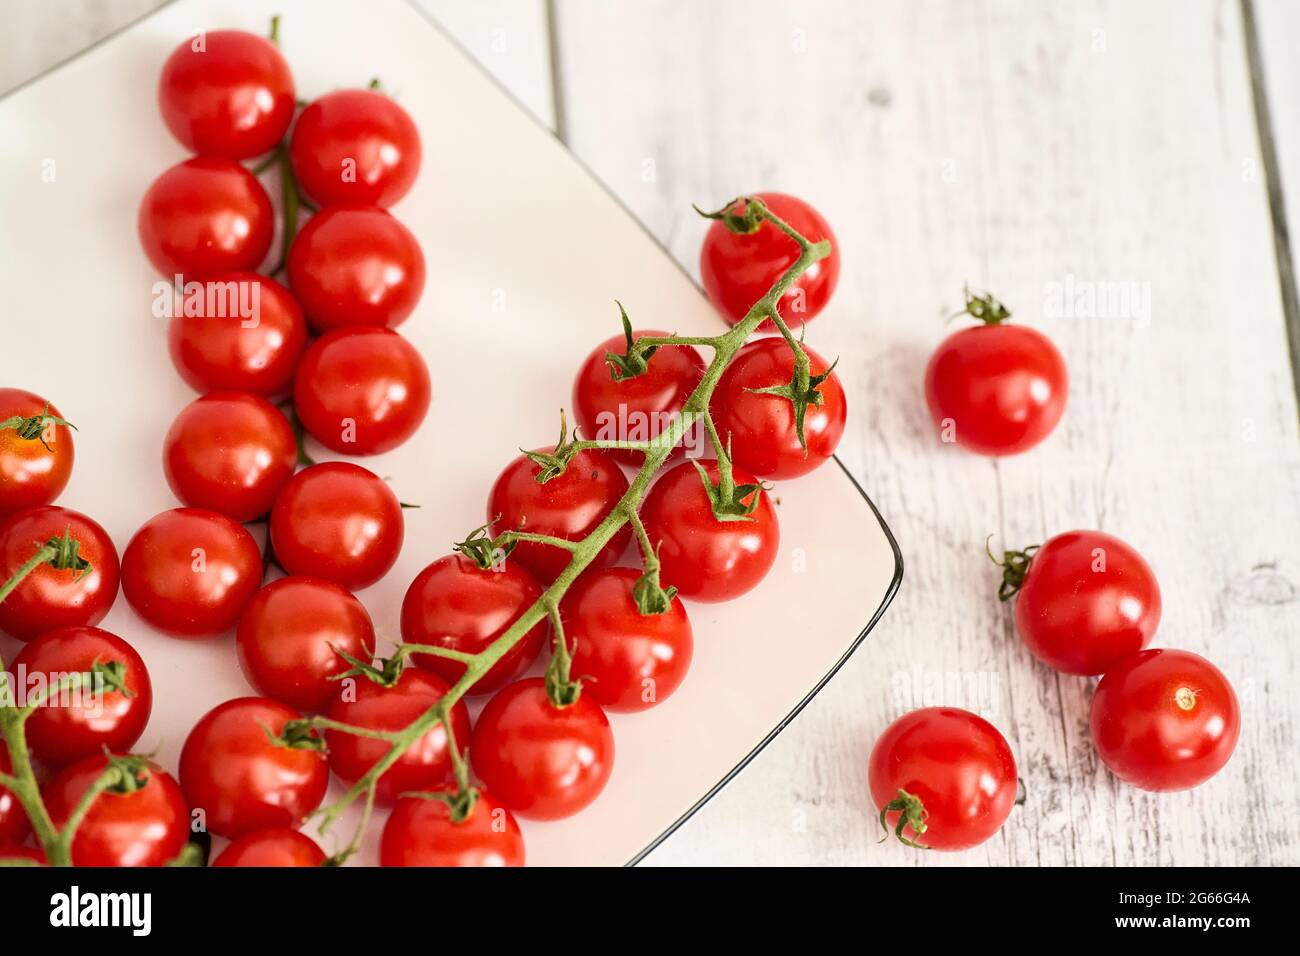 Red Cherry Tomatoes On A White Plate And White Wooden Table. Fehraltorf, Switzerland Stock Photo